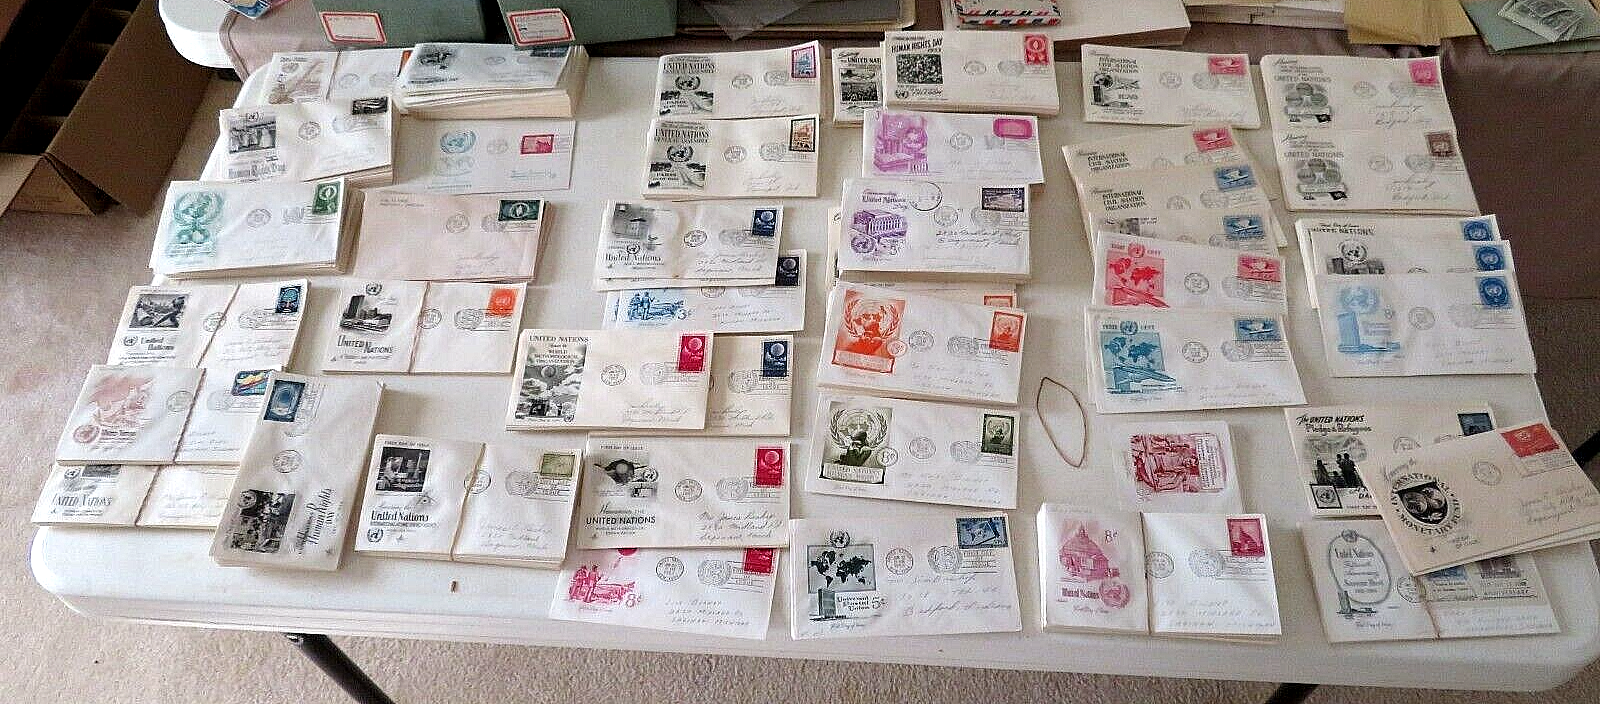 RANDOM LOT OF TEN UNITED NATIONS POSTAL FIRST DAY OF ISSUE CACHETS COVERS 1950s Без бренда